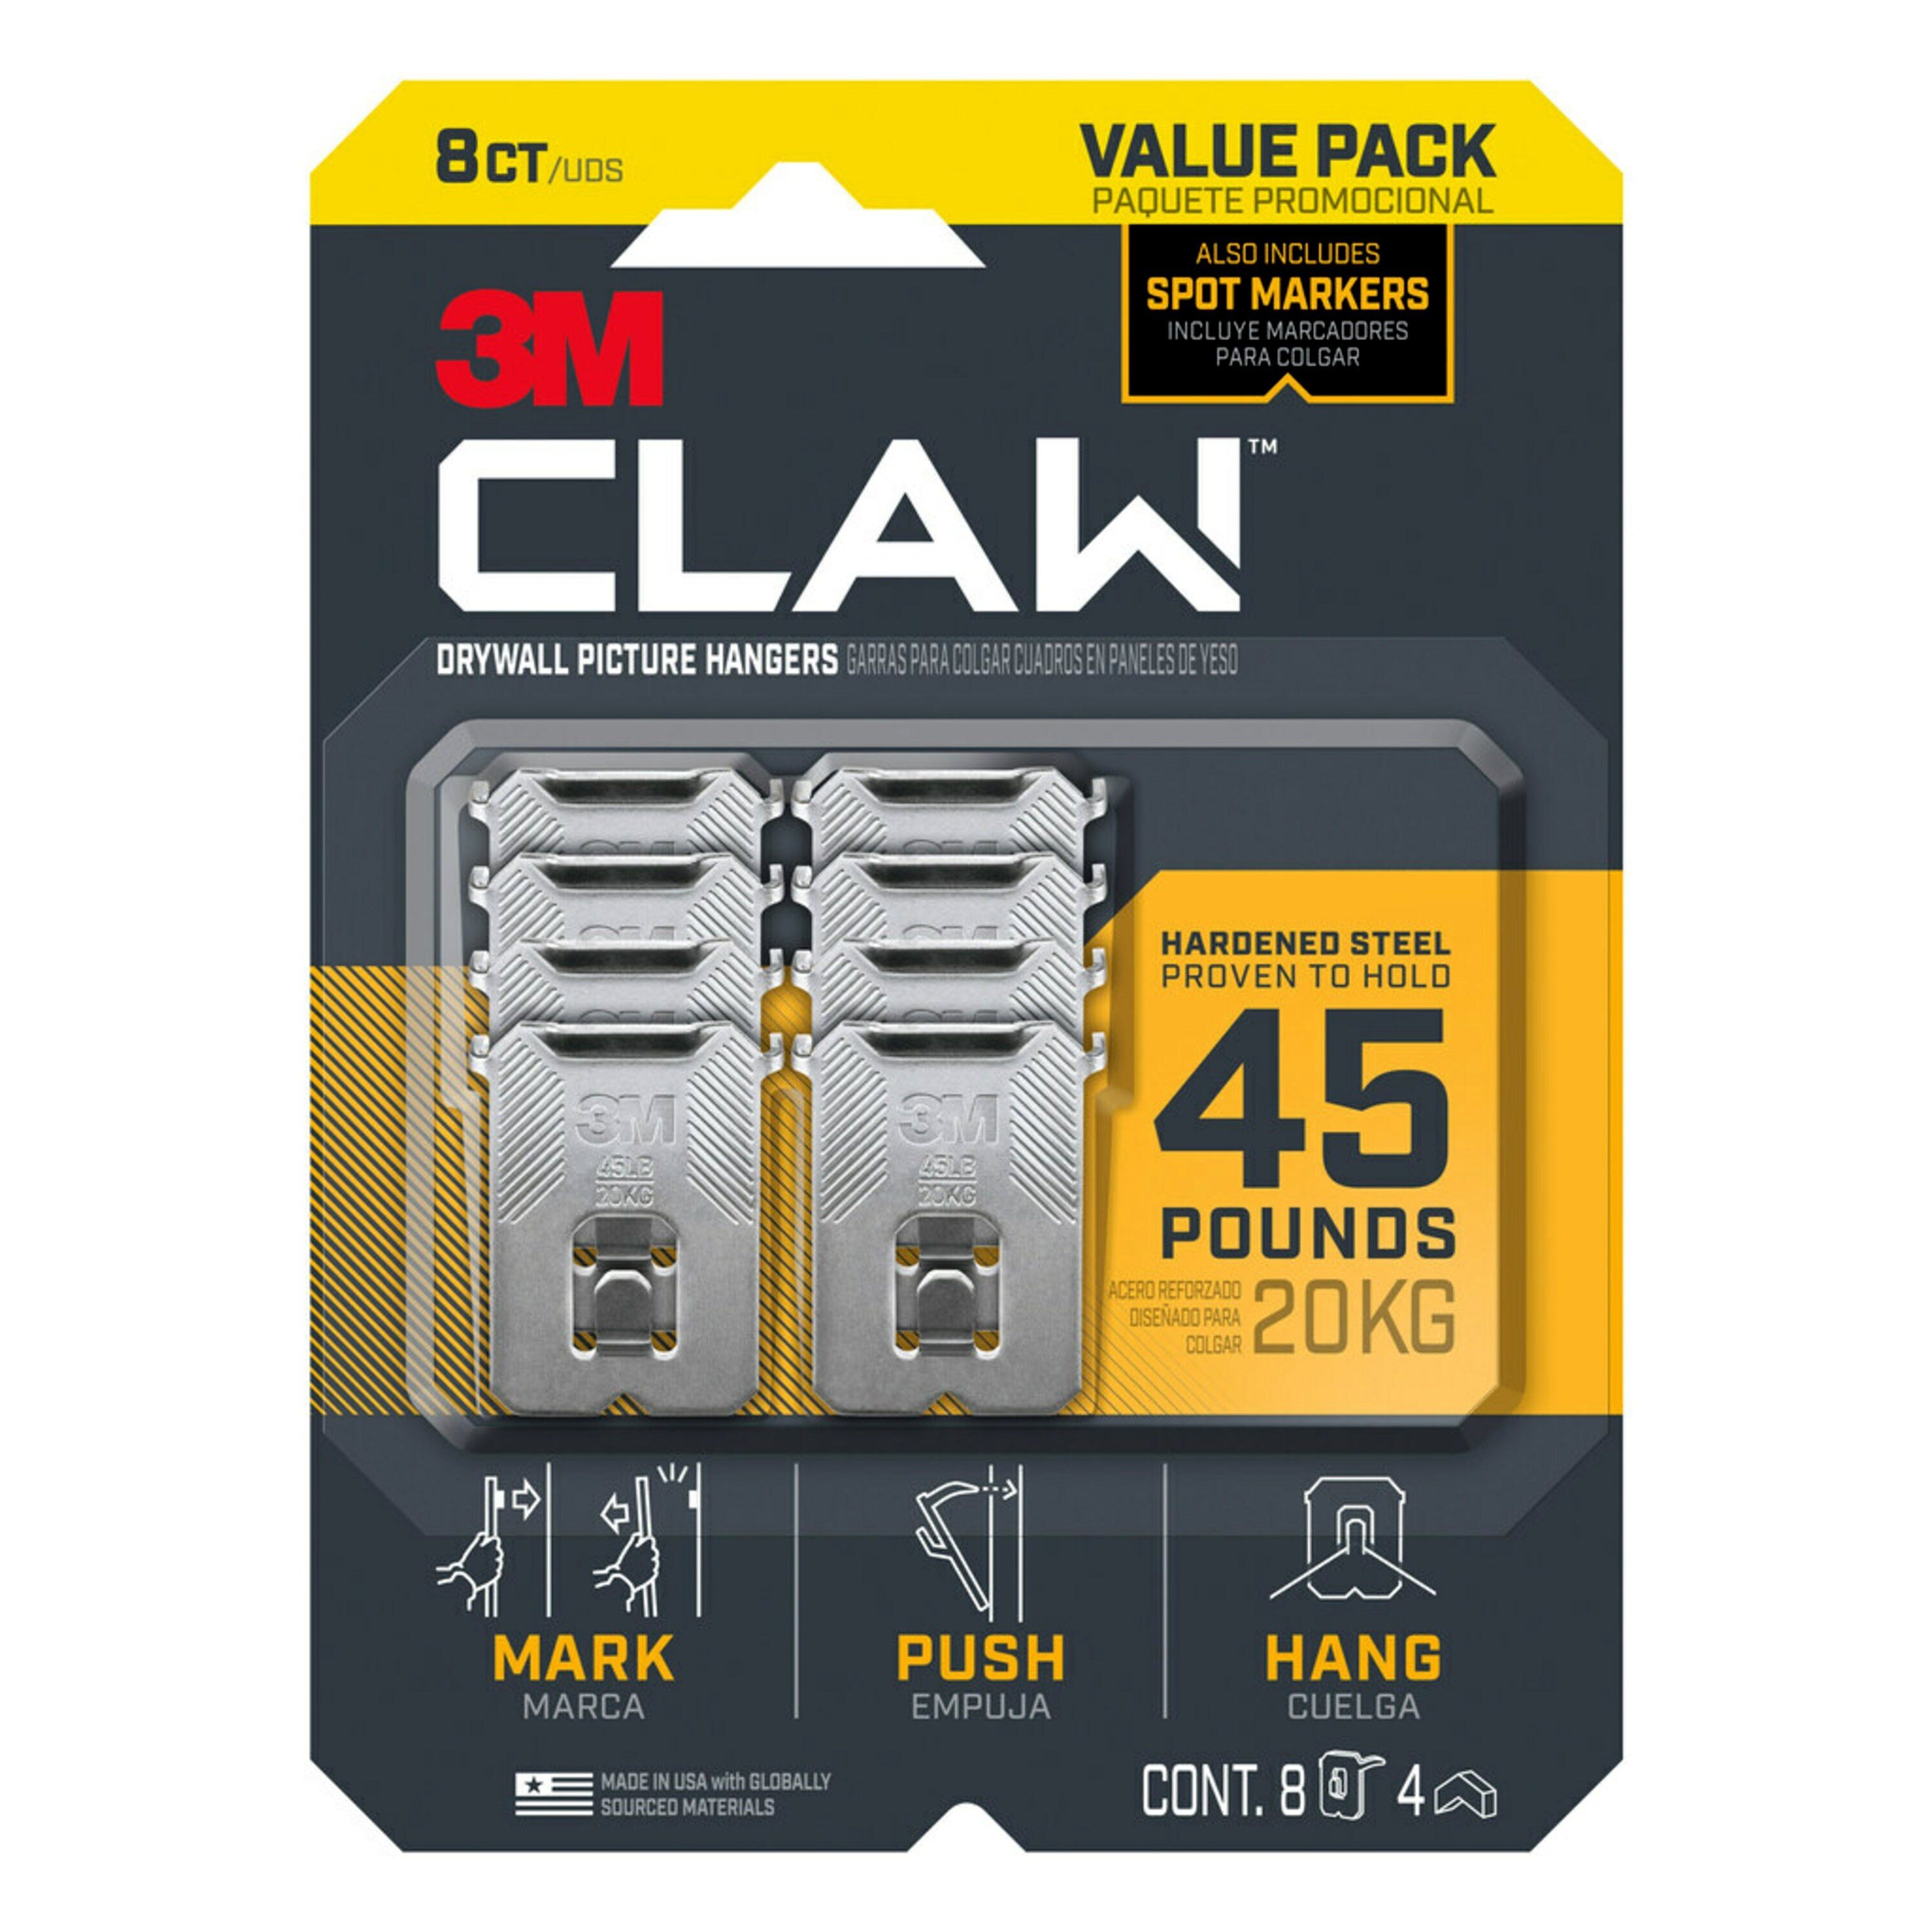 3M 3m Claw Drywall Picture Hangers 25lb with Temporary Spot